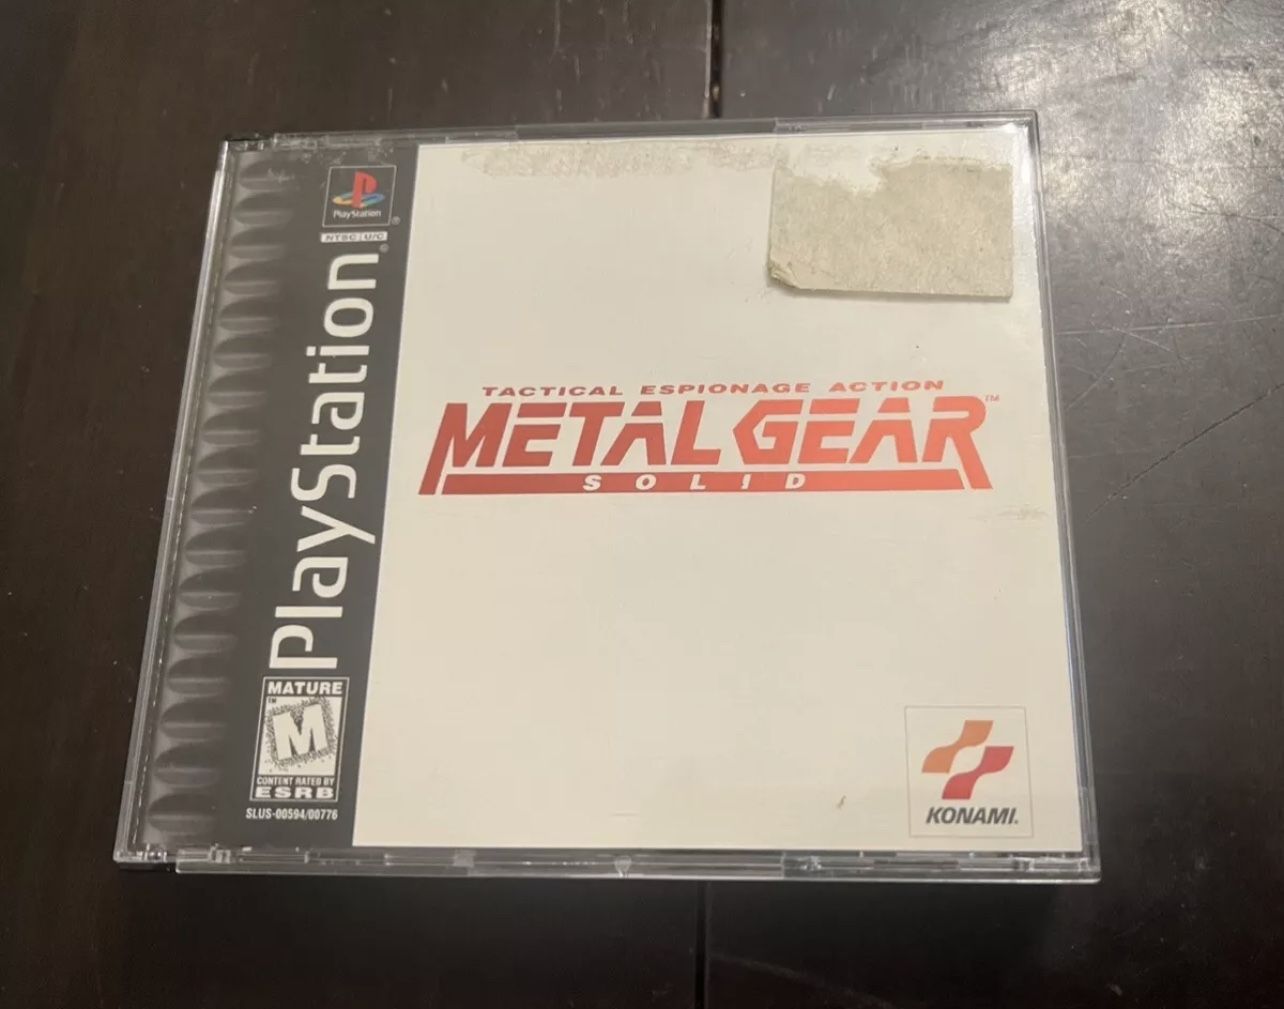 PRICE FIRM! Metal Gear Solid 1 PS1 Complete 